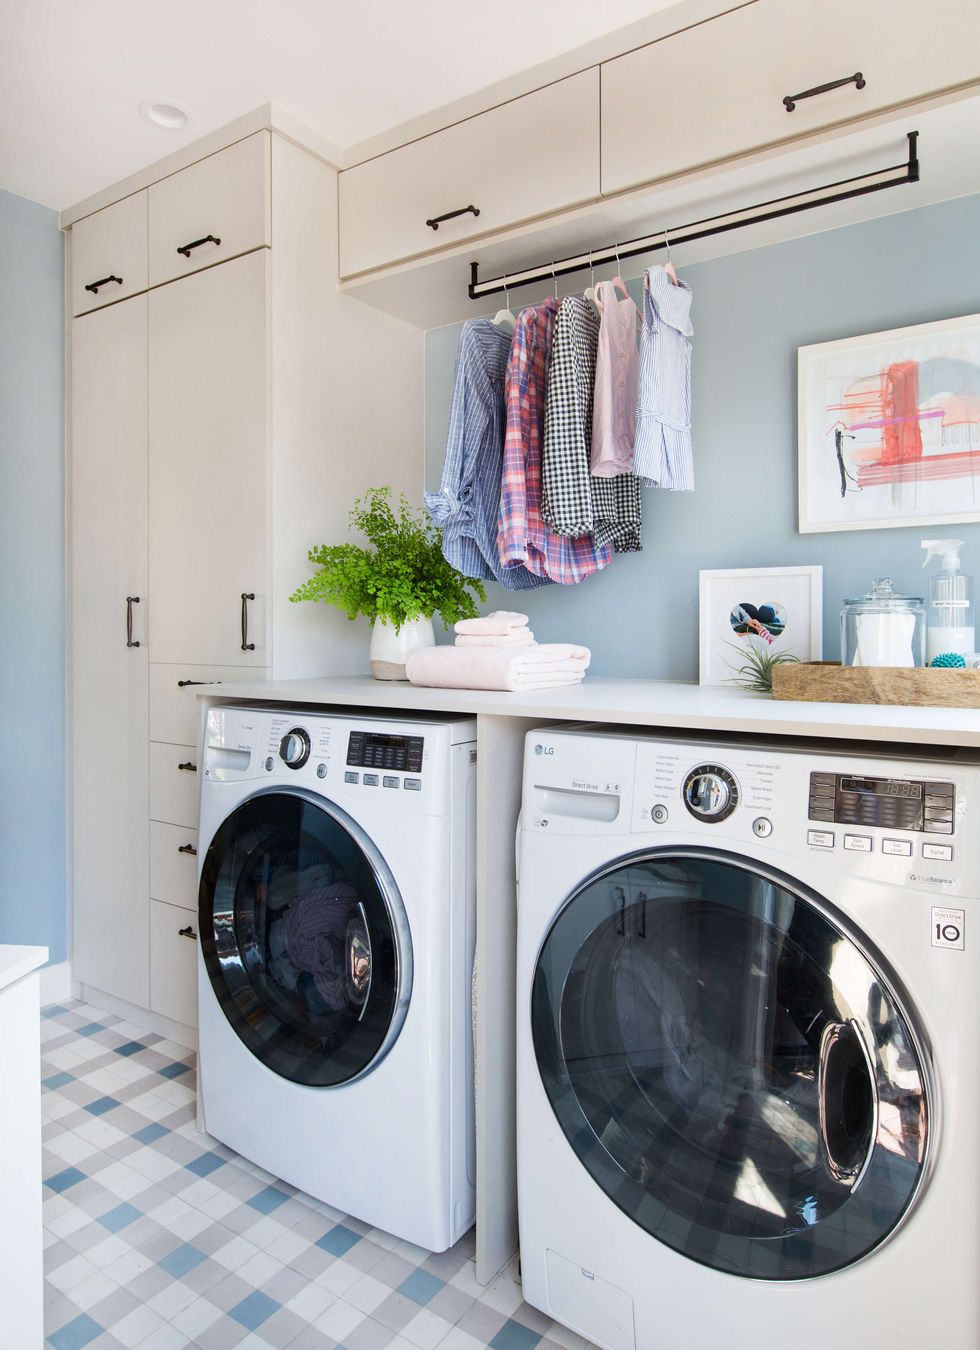 https://hips.hearstapps.com/hmg-prod/images/emily-henderson-modern-english-cottage-laundry-room-persil-california-closets-photos-41-1587572967.jpg?crop=1xw:1xh;center,top&resize=980:*